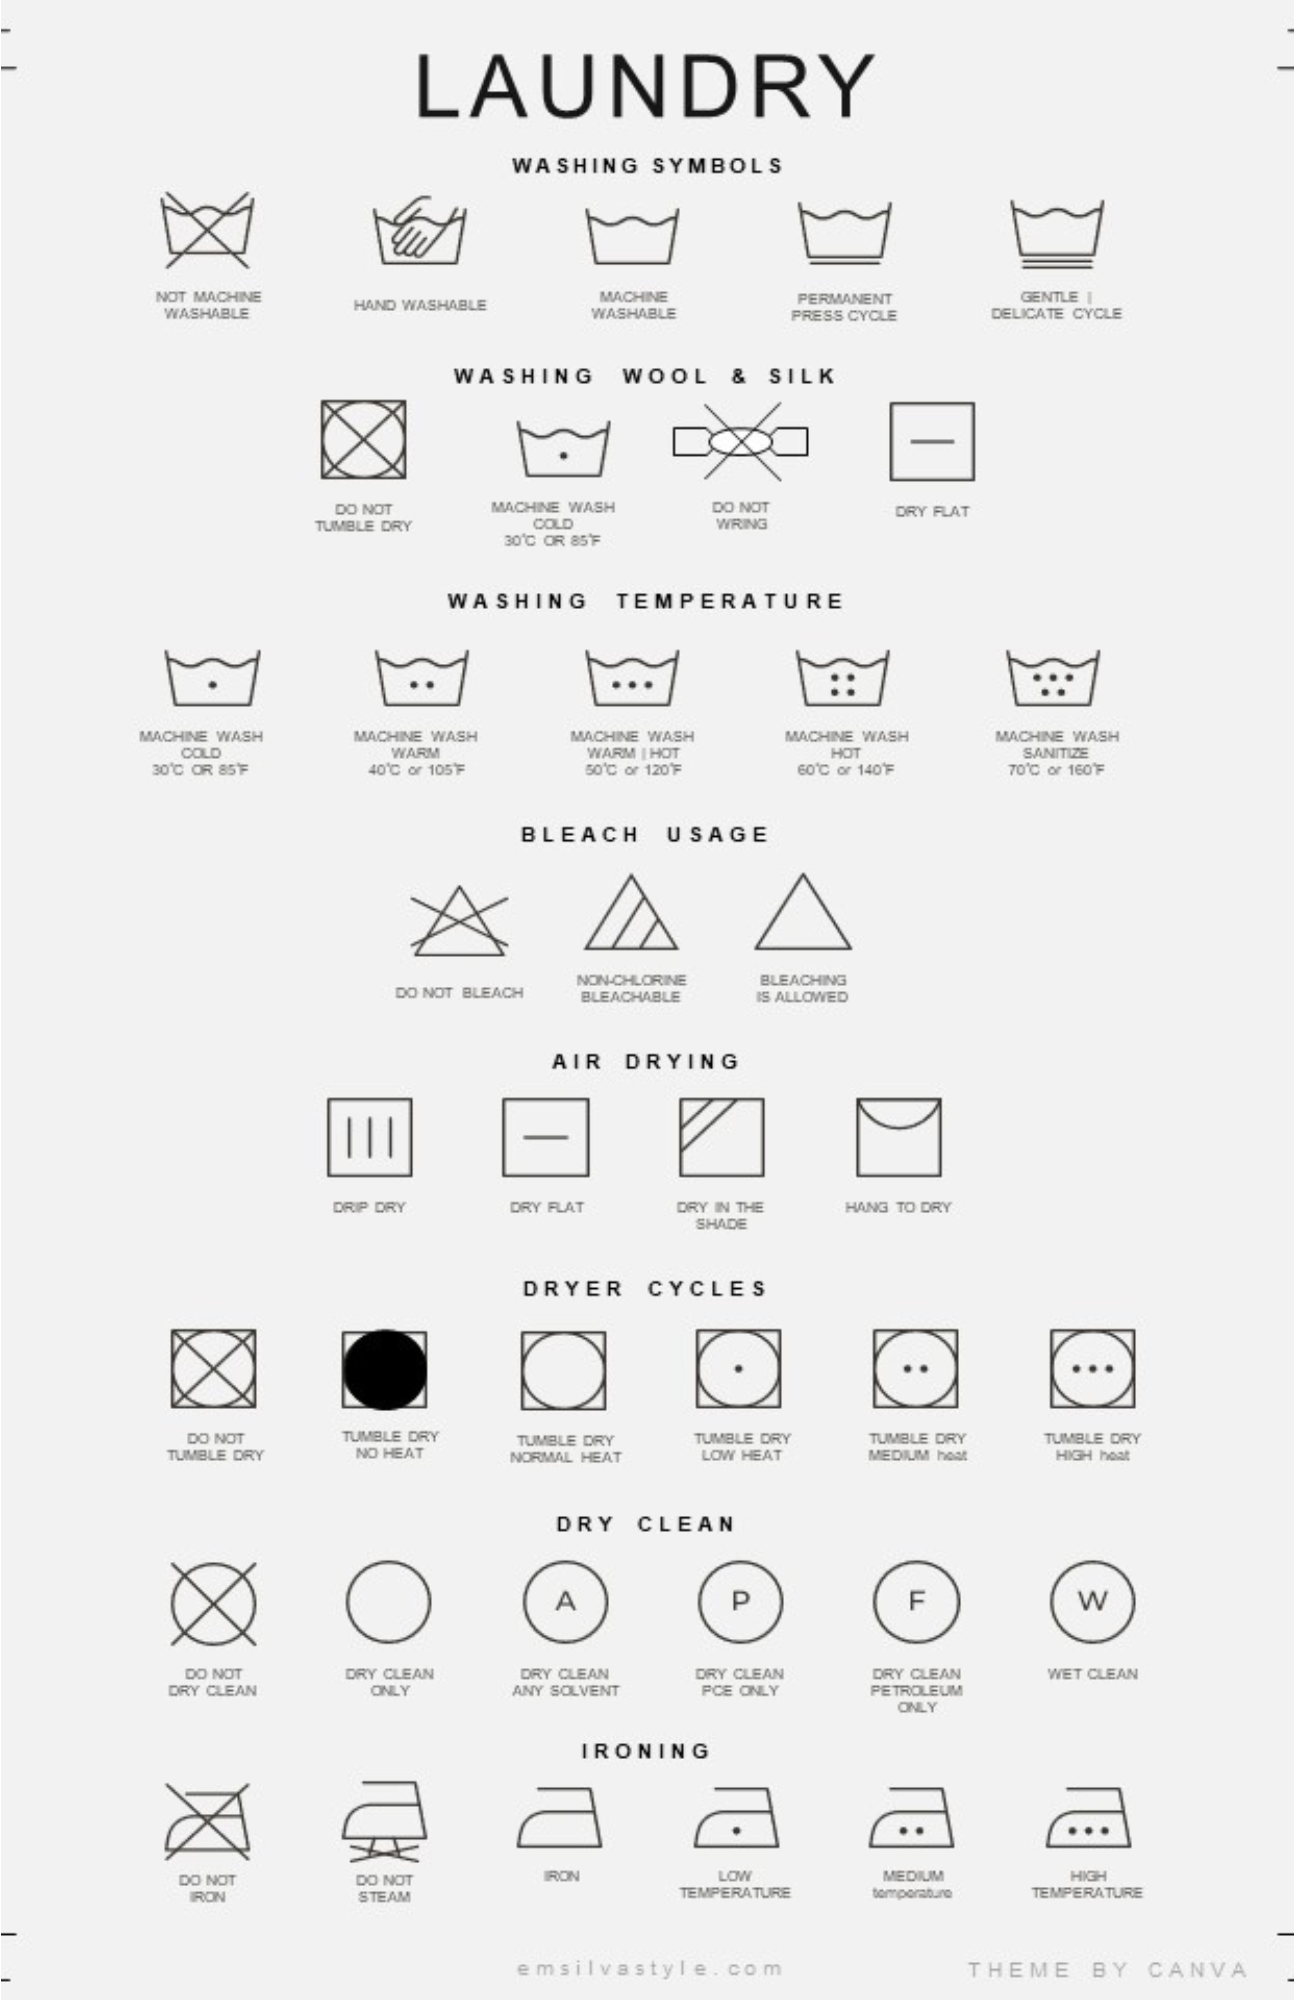 Visual guide: Laundry symbols reference sheet for easy identification and understanding of garment care instructions.